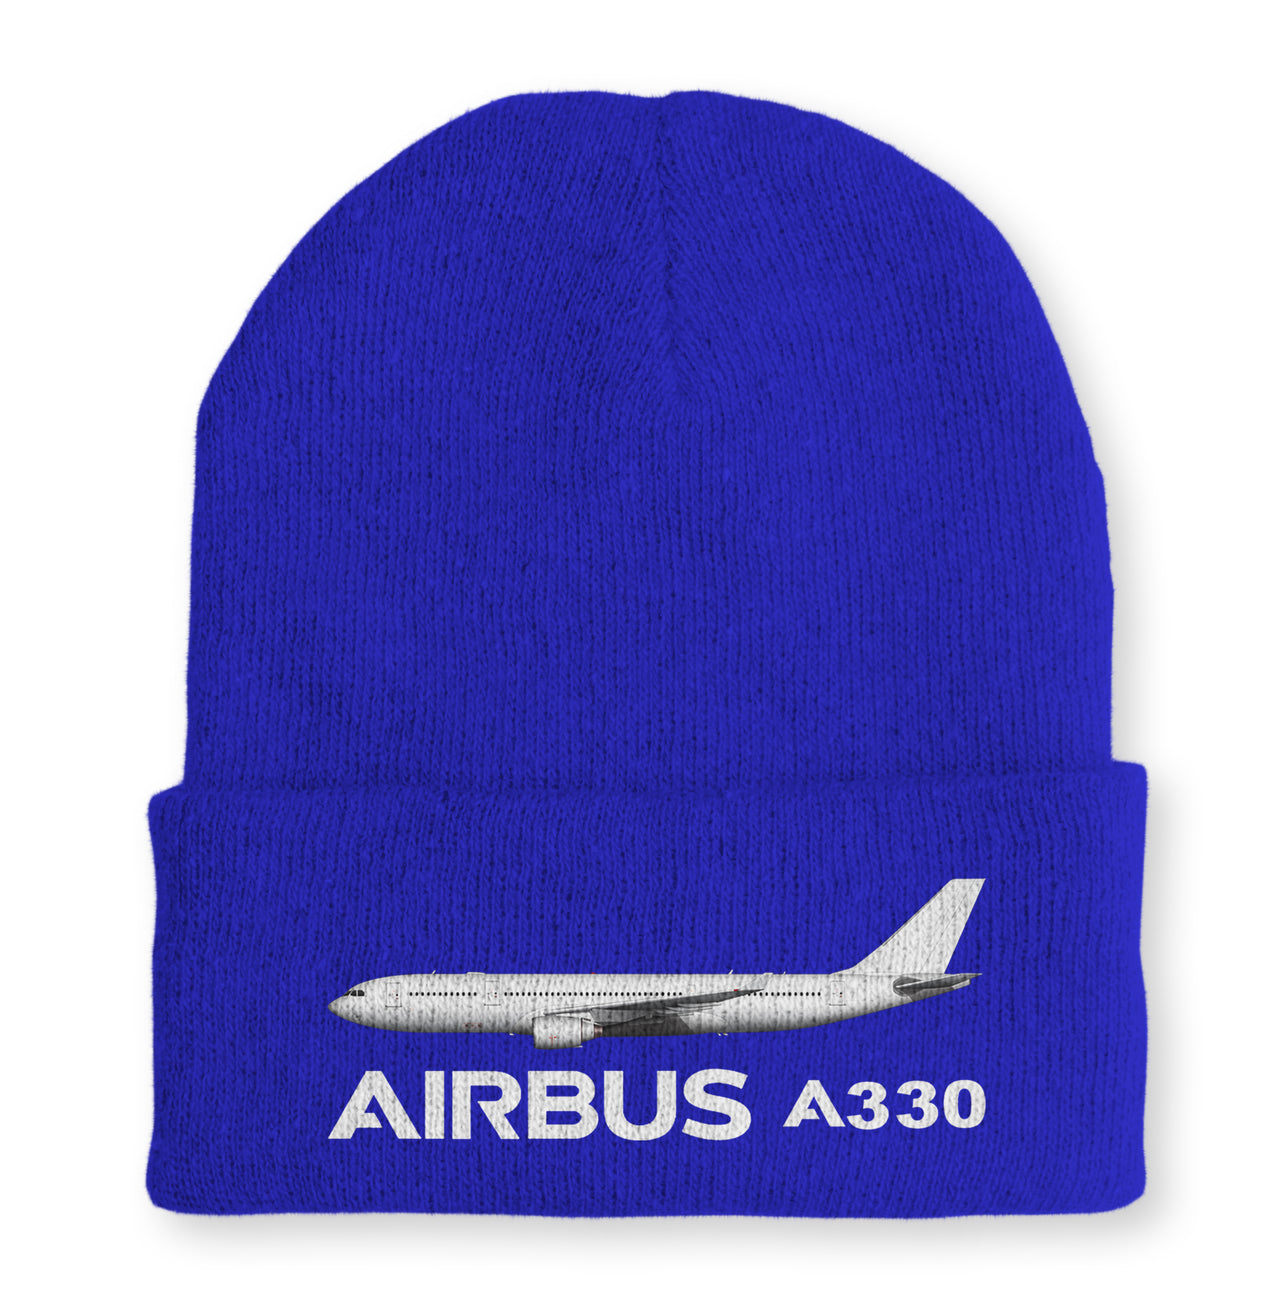 The Airbus A330 Embroidered Beanies